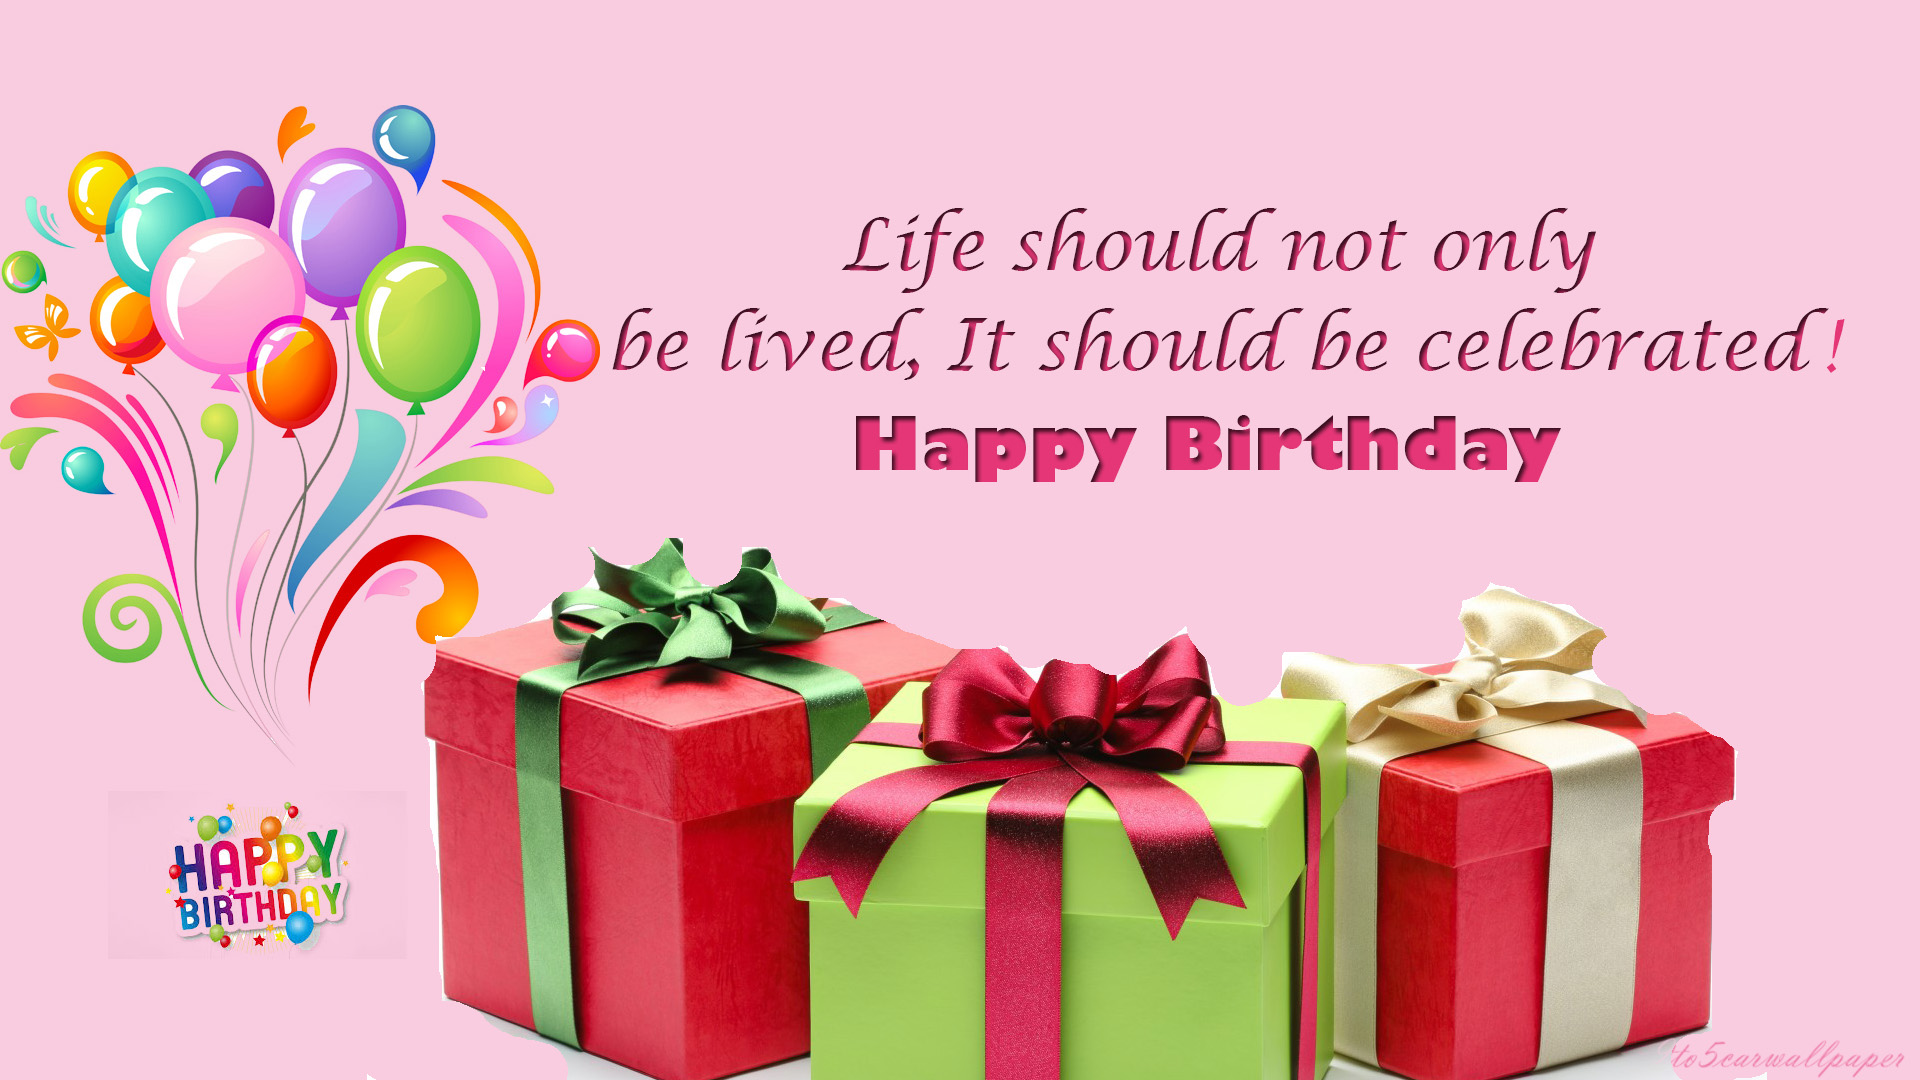 happy-birthday-images-quotes-wallpapers-cards